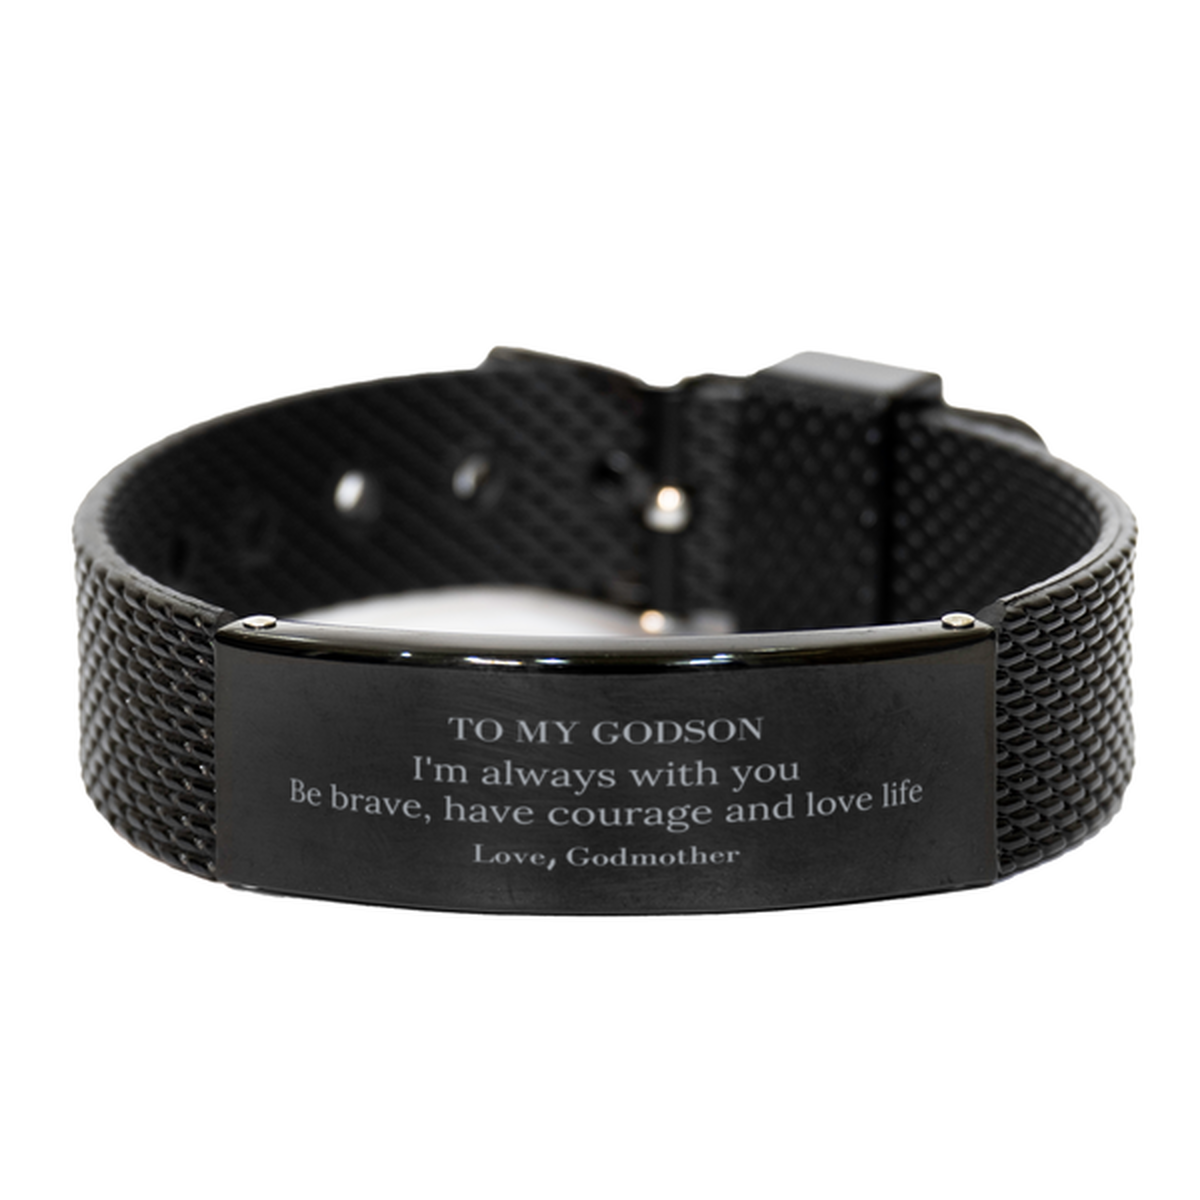 To My Godson Gifts from Godmother, Unique Black Shark Mesh Bracelet Inspirational Christmas Birthday Graduation Gifts for Godson I'm always with you. Be brave, have courage and love life. Love, Godmother